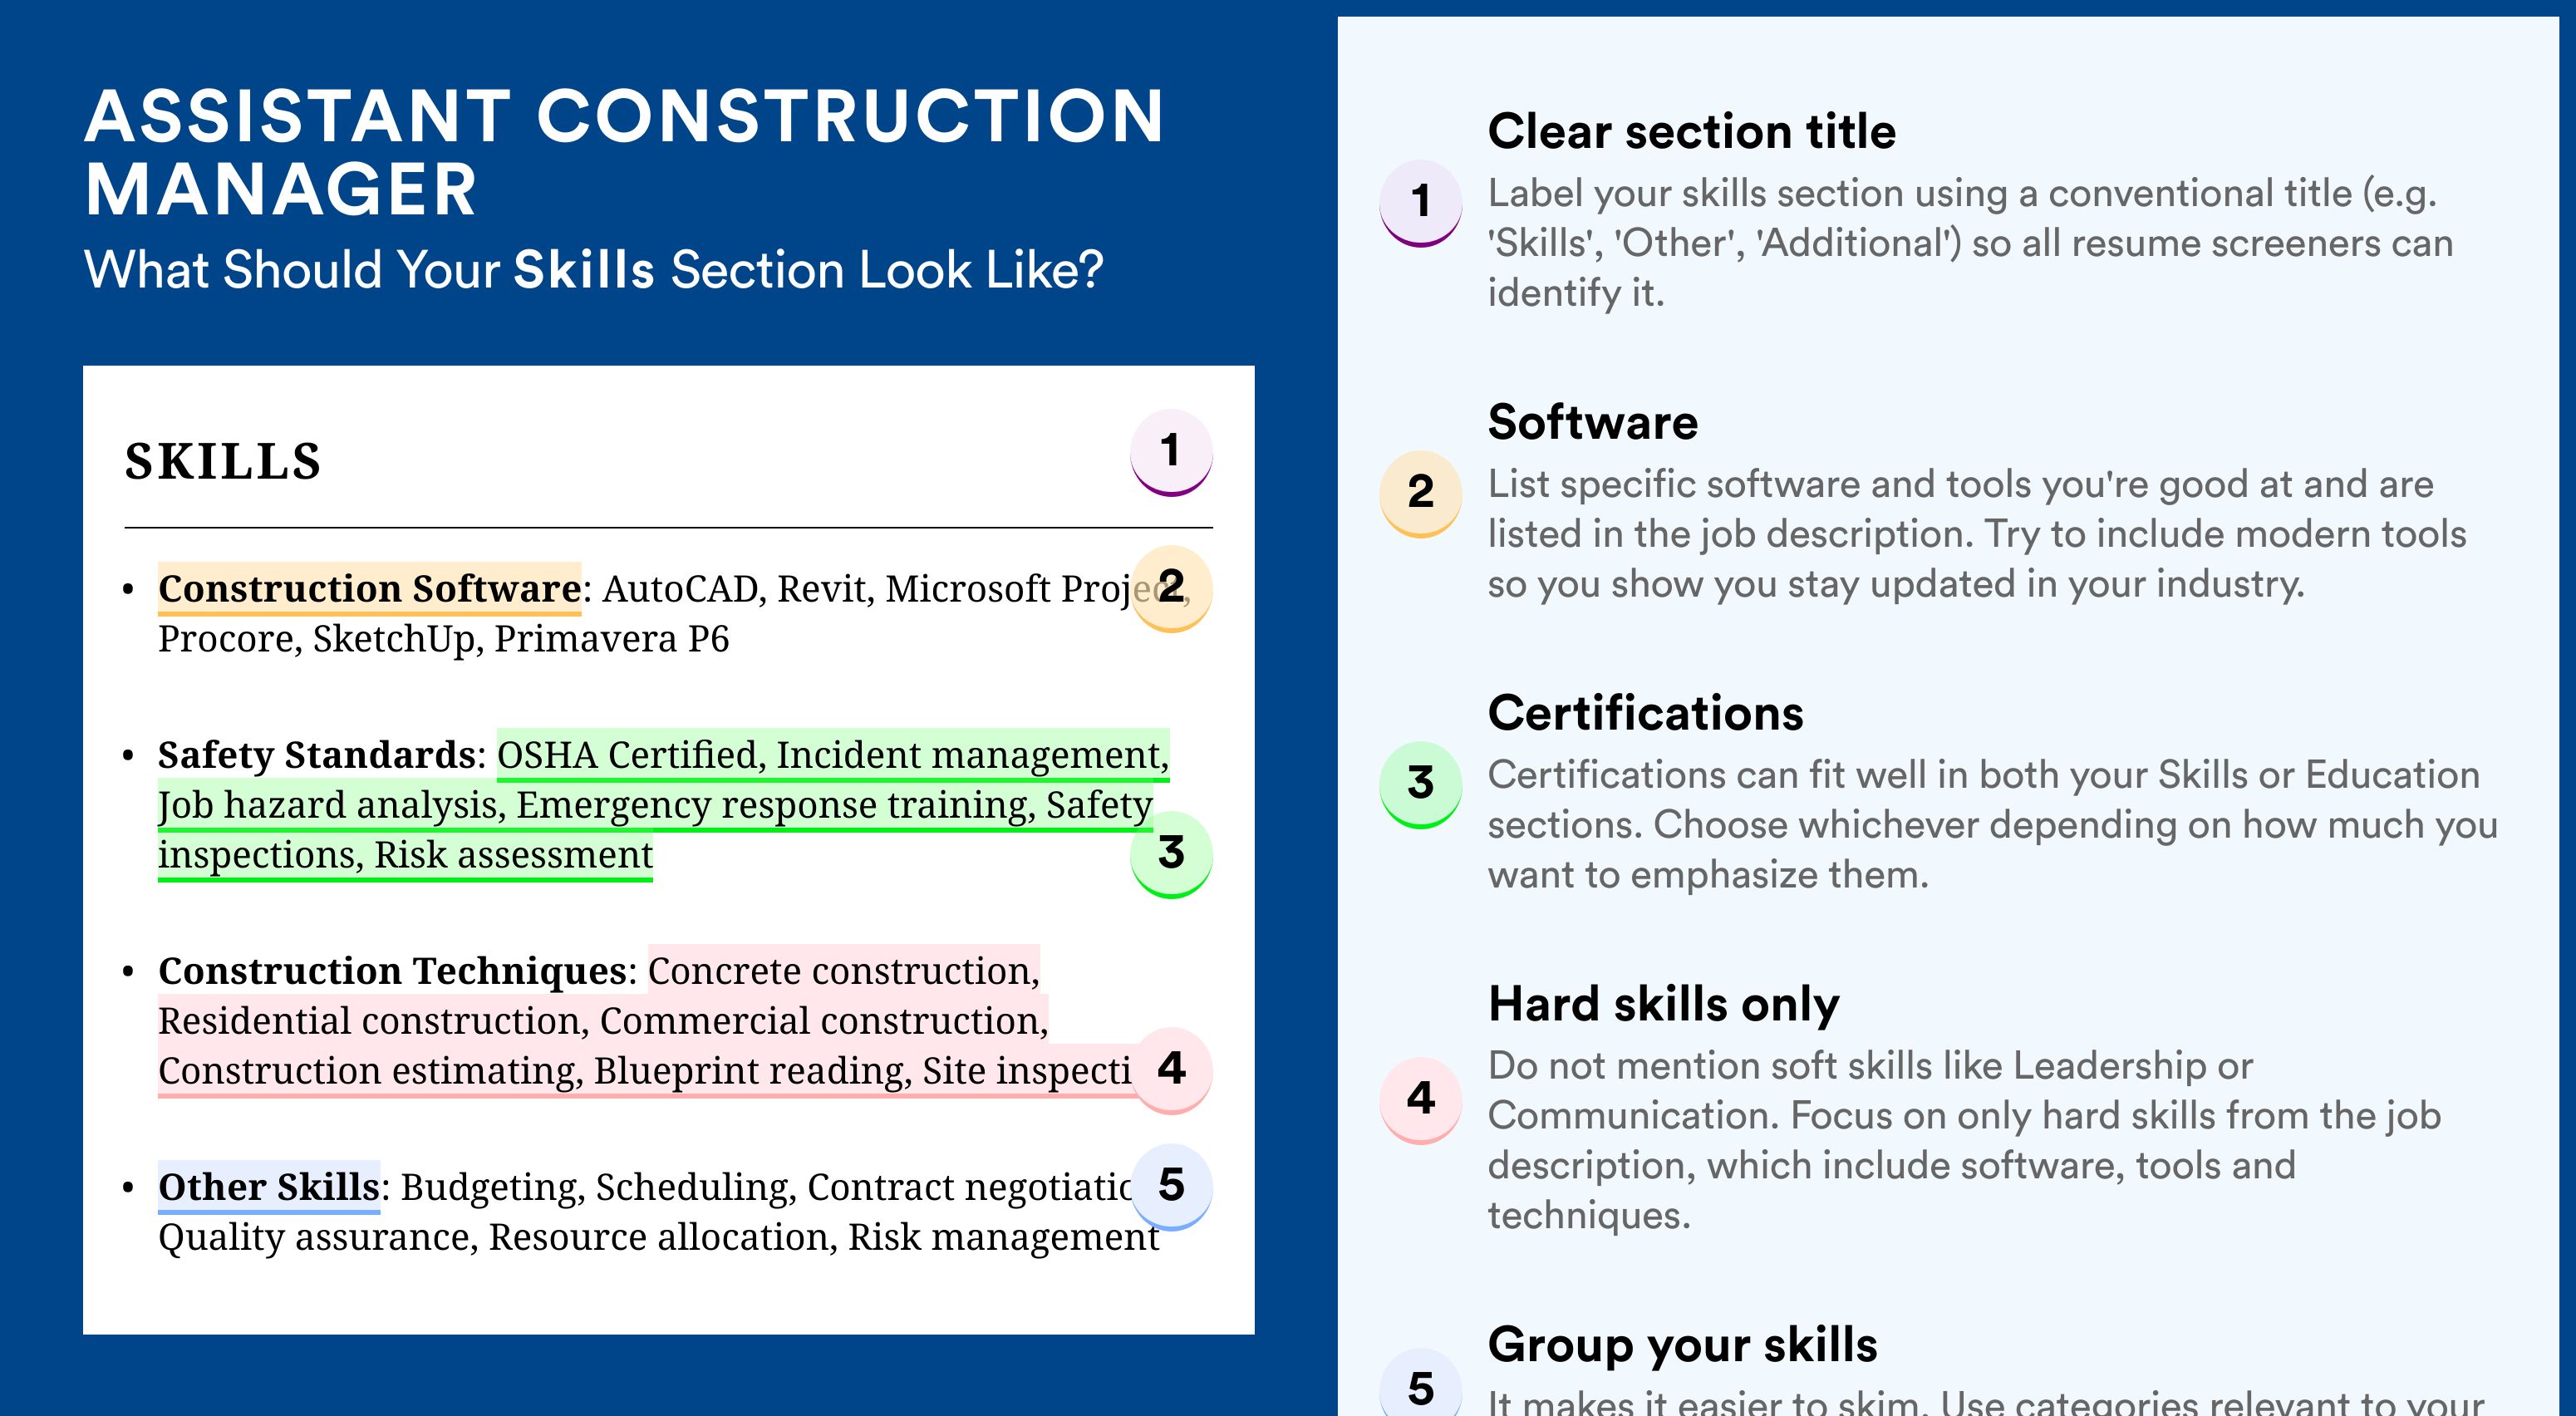 How To Write Your Skills Section - Assistant Construction Manager Roles